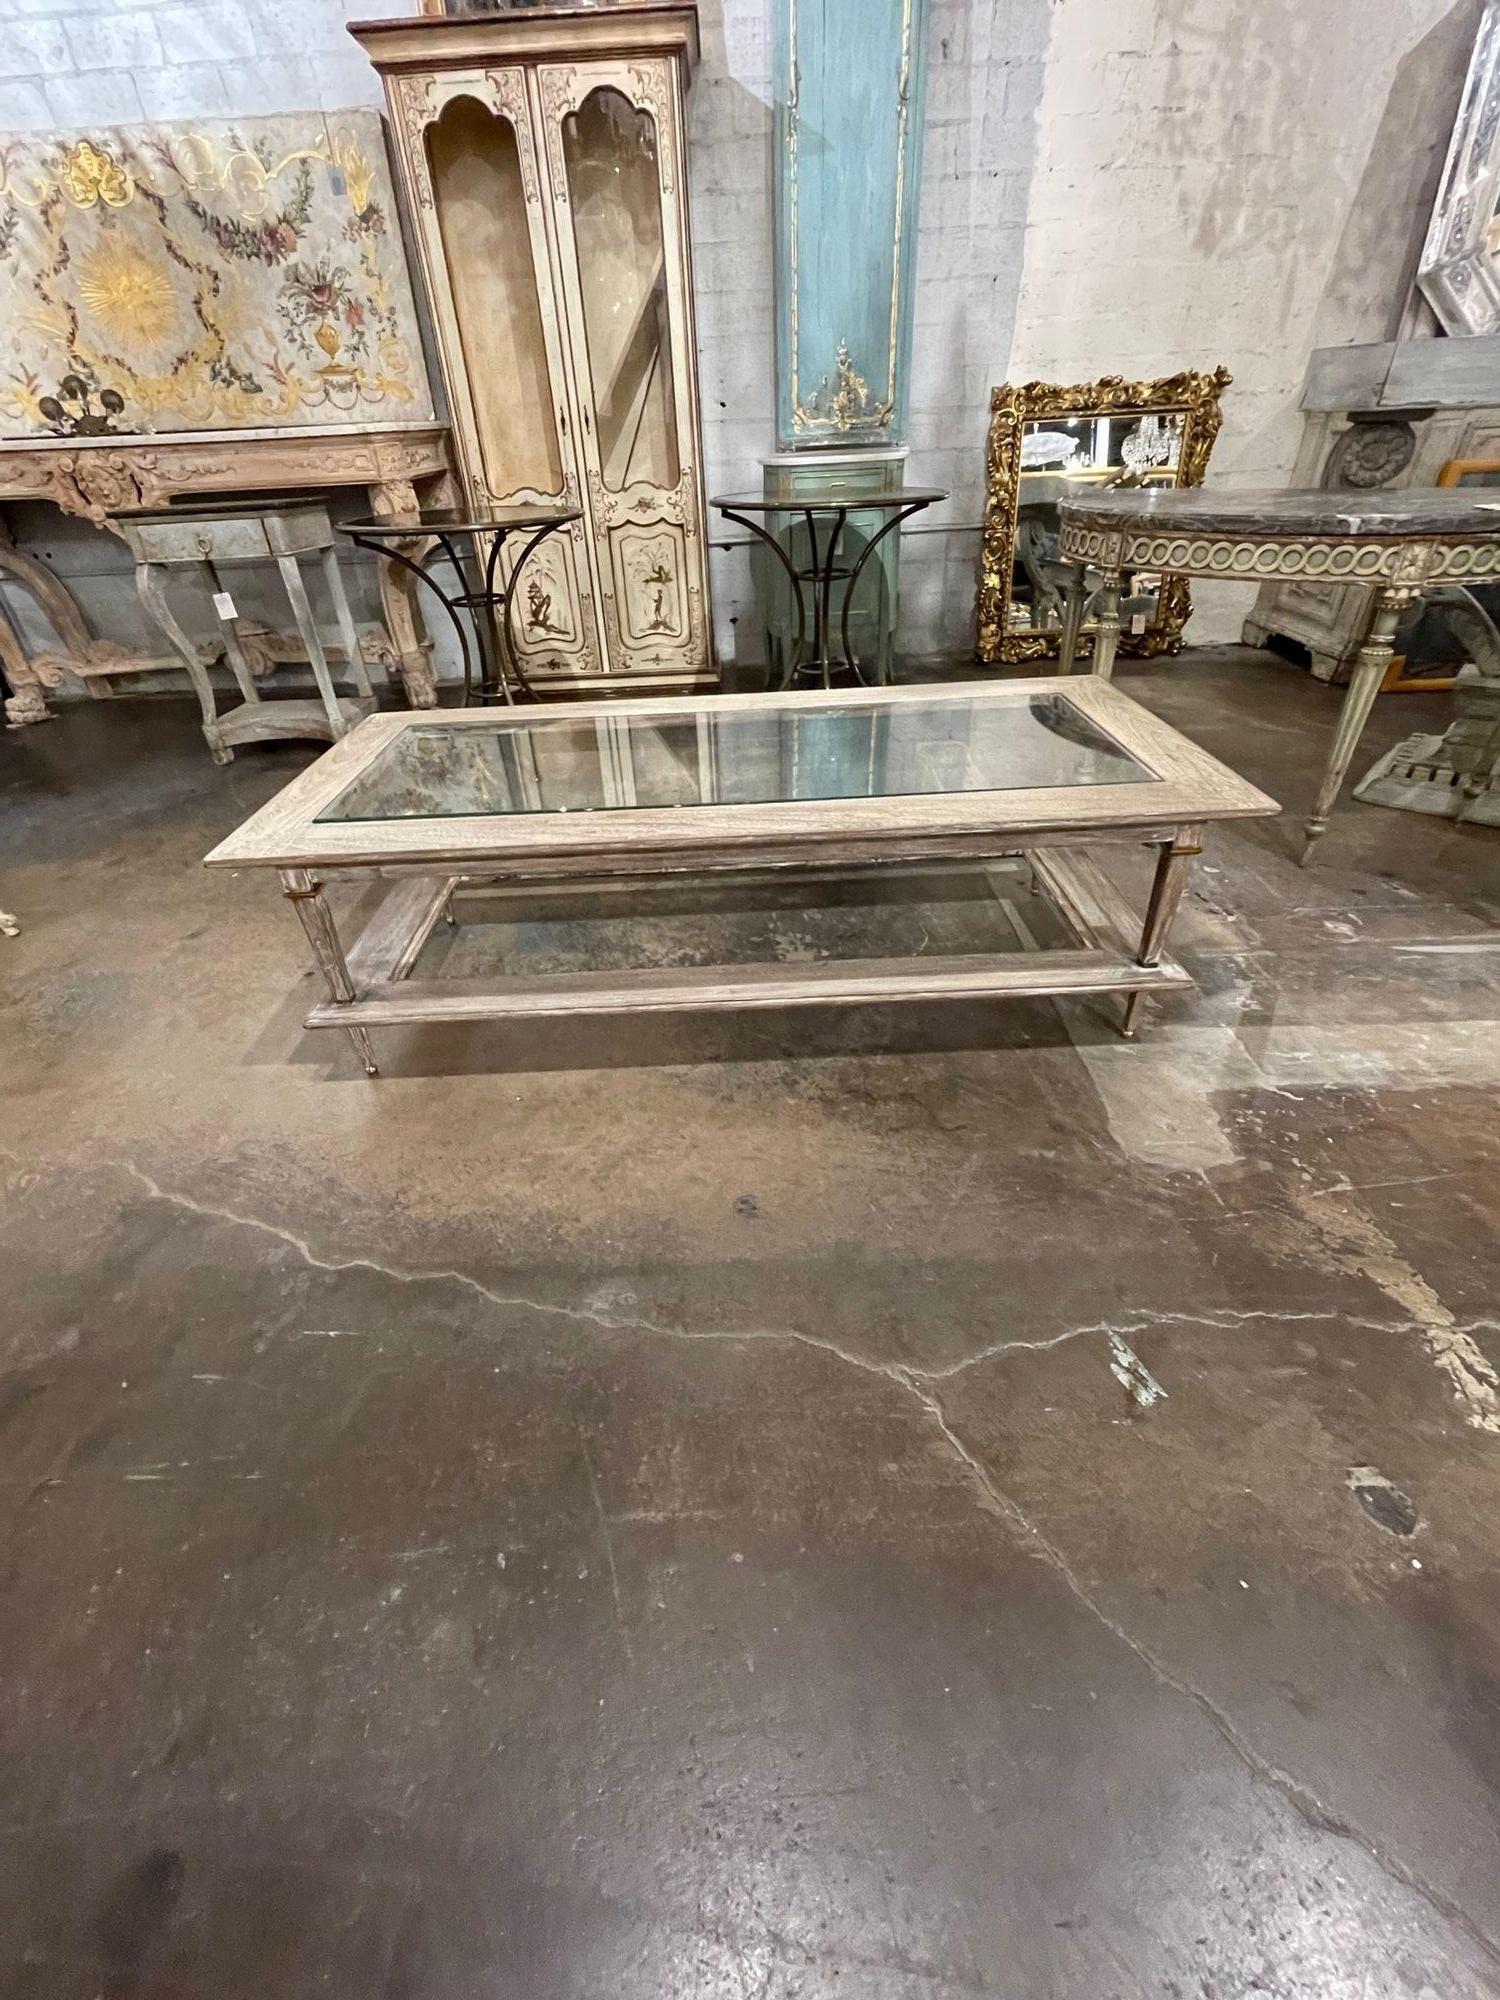 Handsome vintage Italian Directoire style pickled oak and brass coffee table with glass top. Very nice patina and mixes well with a variety of styles. Lovely!!